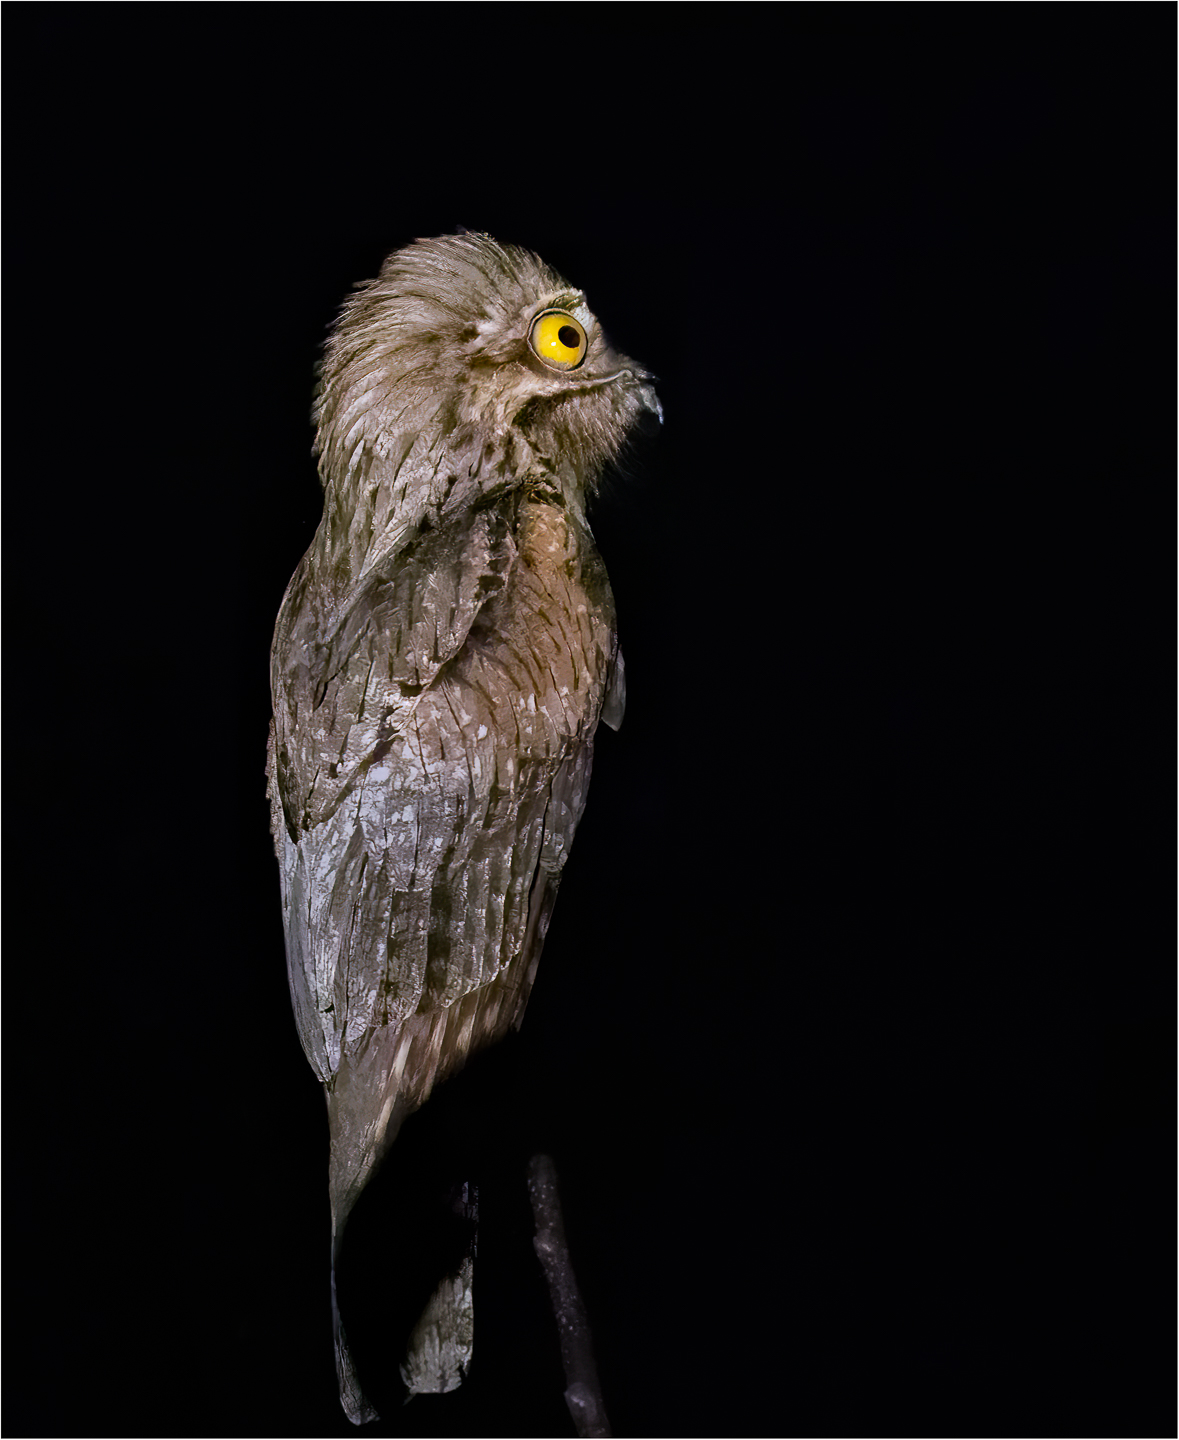 1st PrizeOpen Color In Class 3 By John Hoyt For Nocturnal Northern Potoo APR-2023.jpg